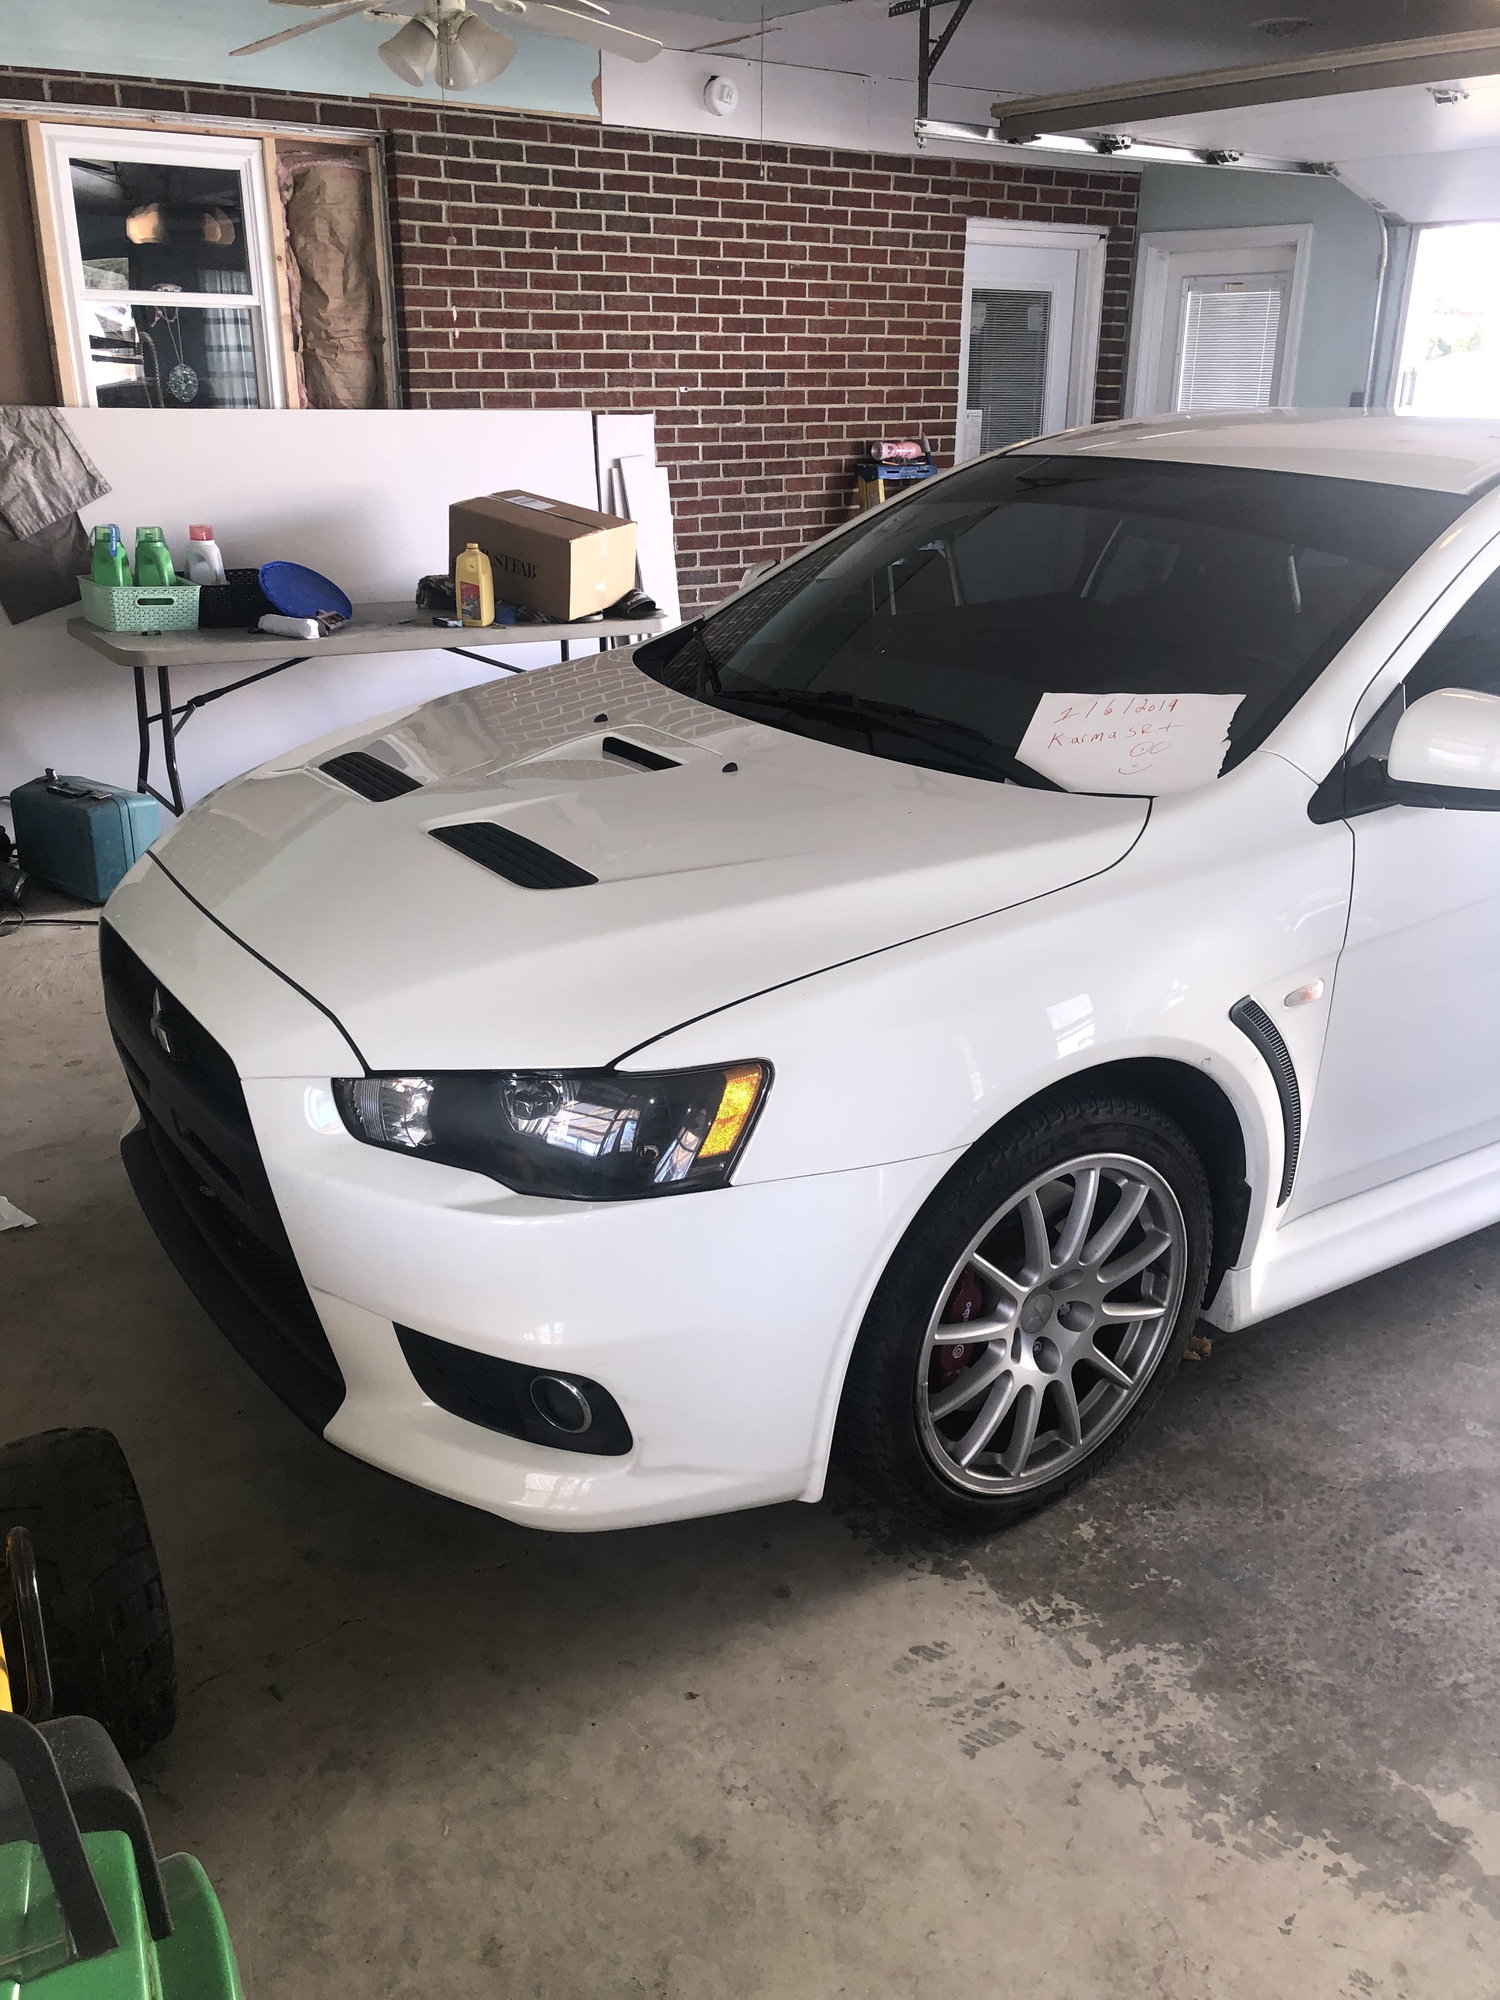 2013 Mitsubishi Lancer Evolution - 2013 Evo x 59,000 miles for sale clean girl driven ! - Used - VIN 2013 Evo x F/s - 58,643 Miles - 4 cyl - AWD - Manual - Sedan - White - Hagerstown, MD 21740, United States